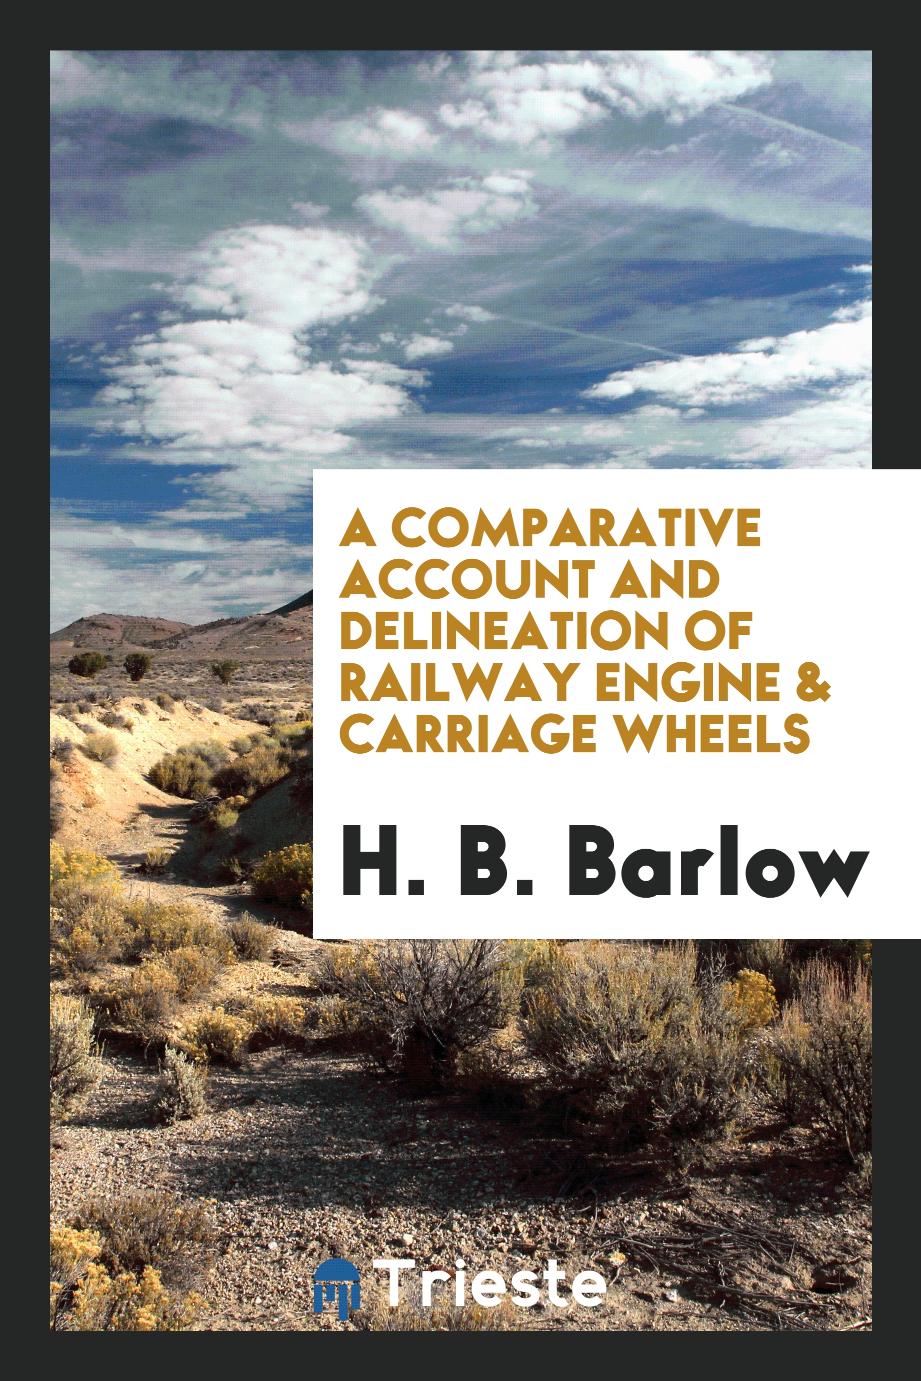 A comparative account and delineation of railway engine & carriage wheels